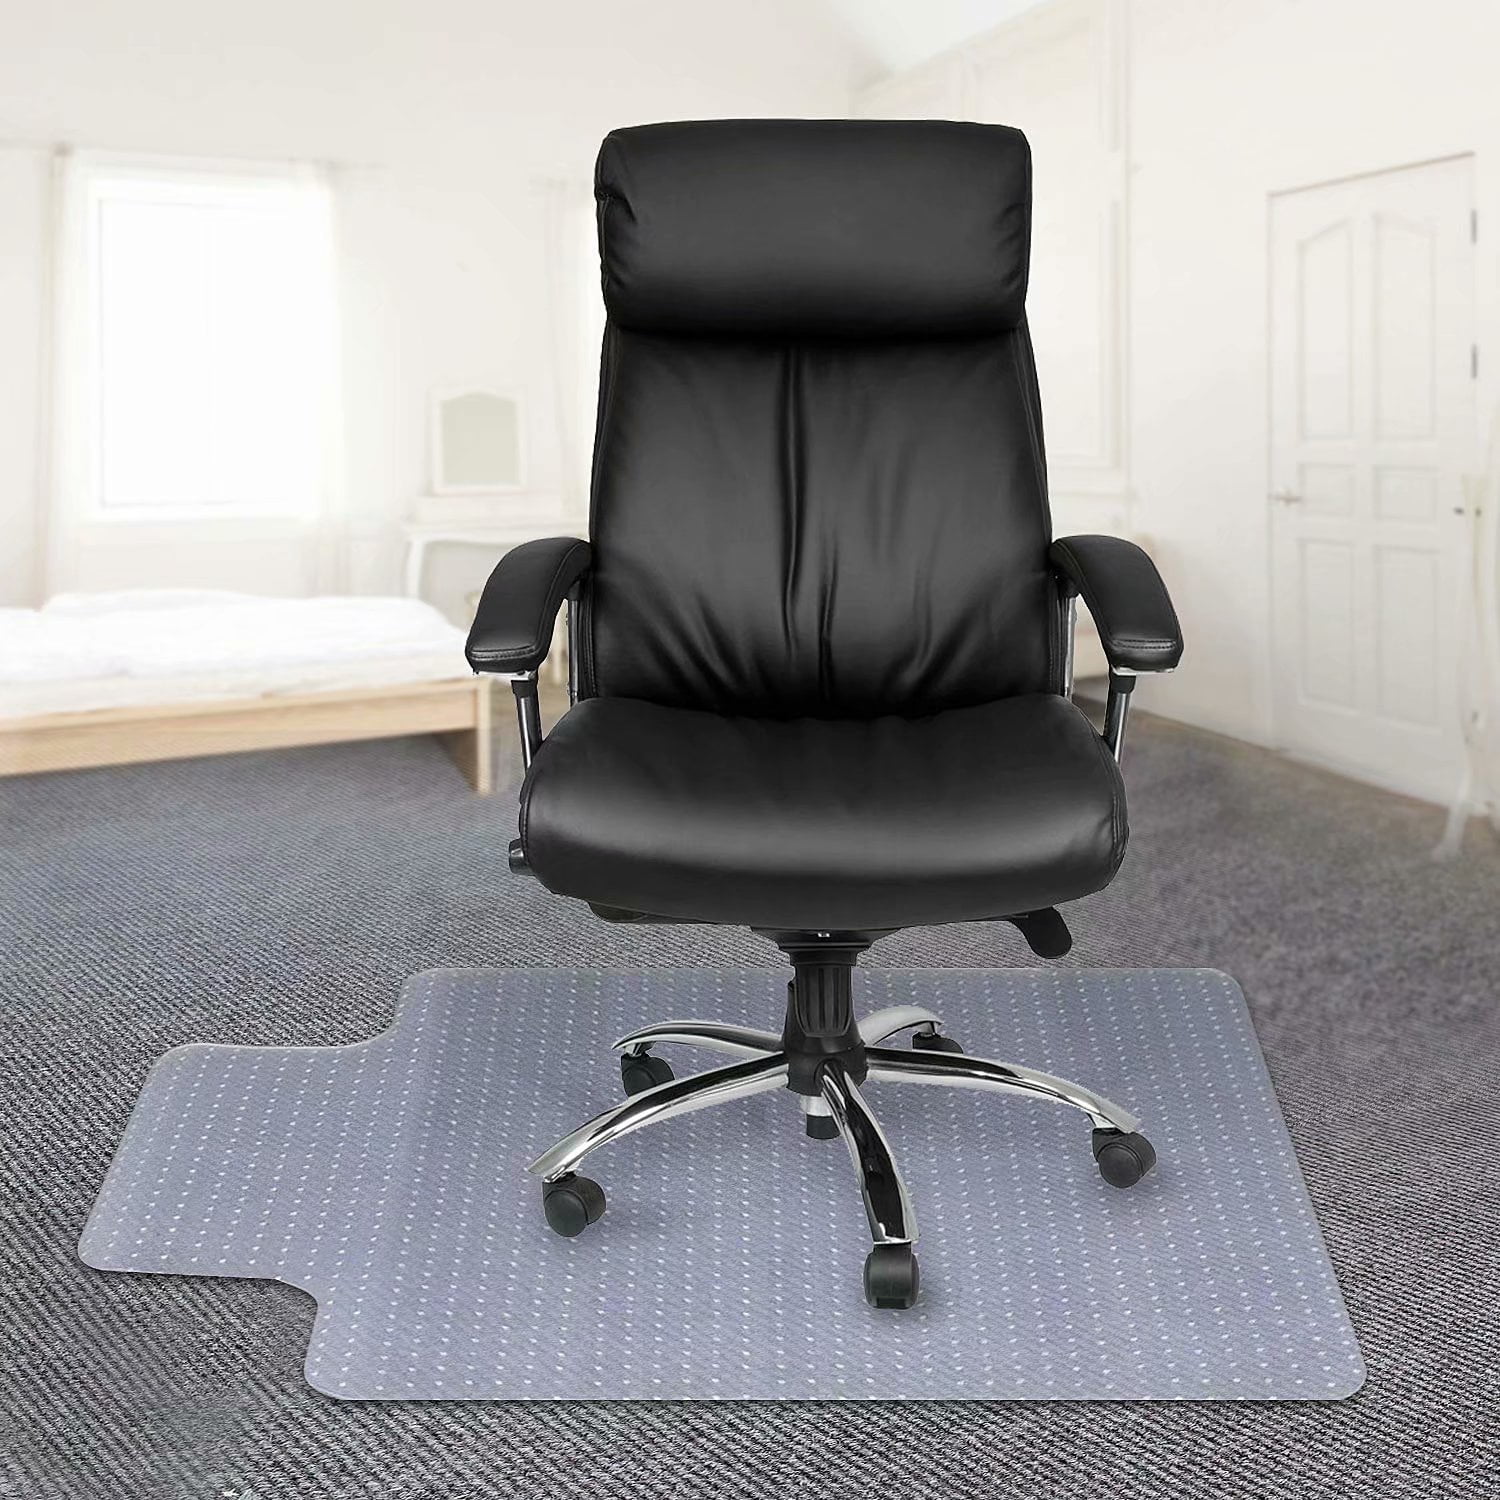 Studded 36 X 48 Rectangle for Carpet 48 x 36 PVC Home Office Desk Chair Mat for Floor Protection Kuyal Carpet Chair Mat Clear BPA Free Matte Anti-Slip 